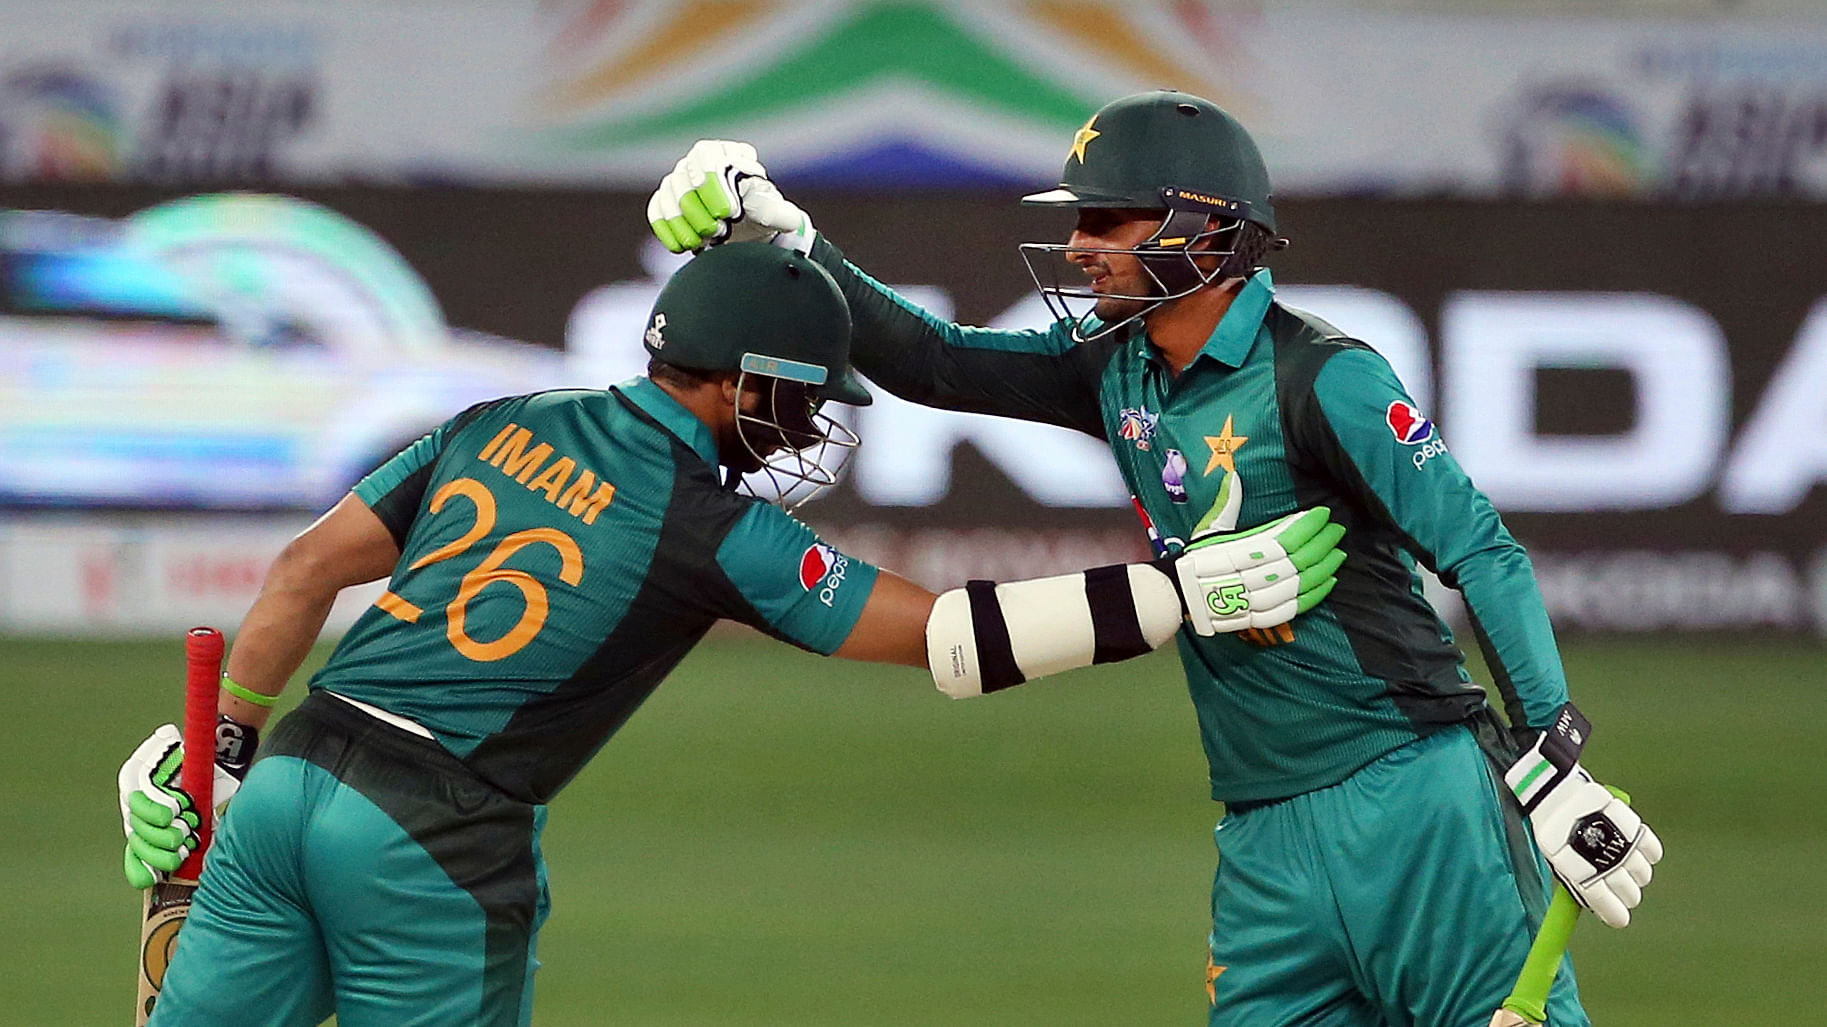 Pakistan’s Shoaib Malik, right, congratulates teammate Imam-ul-Haq on scoring a fifty runs during the one day international cricket match of Asia Cup between Pakistan and Hong Kong in Dubai, United Arab Emirates, Sunday, Sept. 16, 2018.&nbsp;